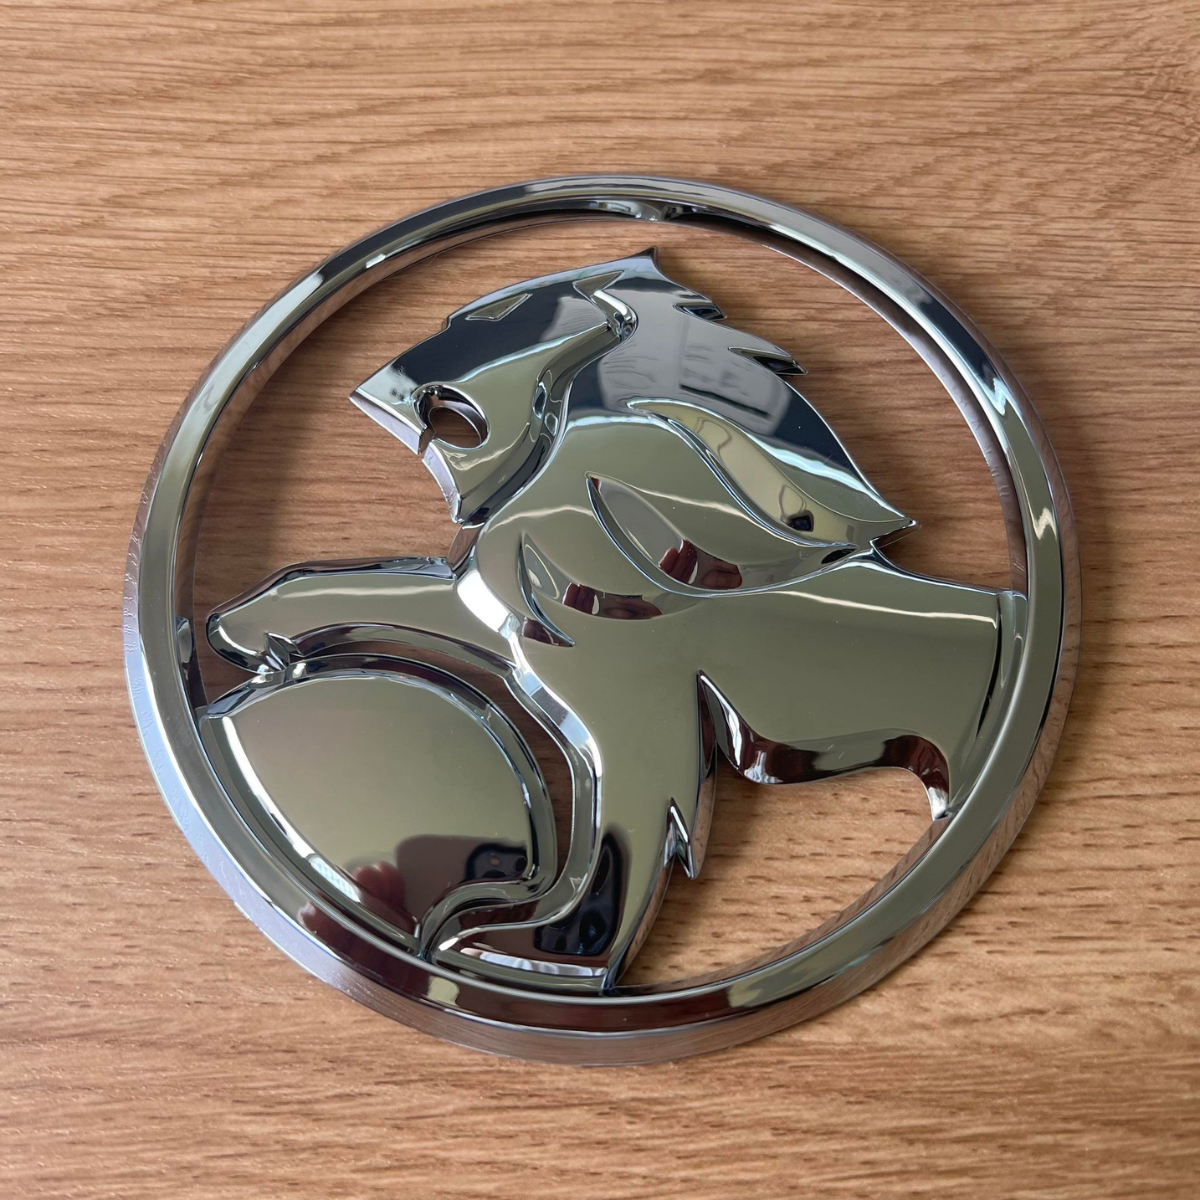 Holden Chrome Lion Badge Commodore Grille VF SV6 SS SSV Calais Berlina